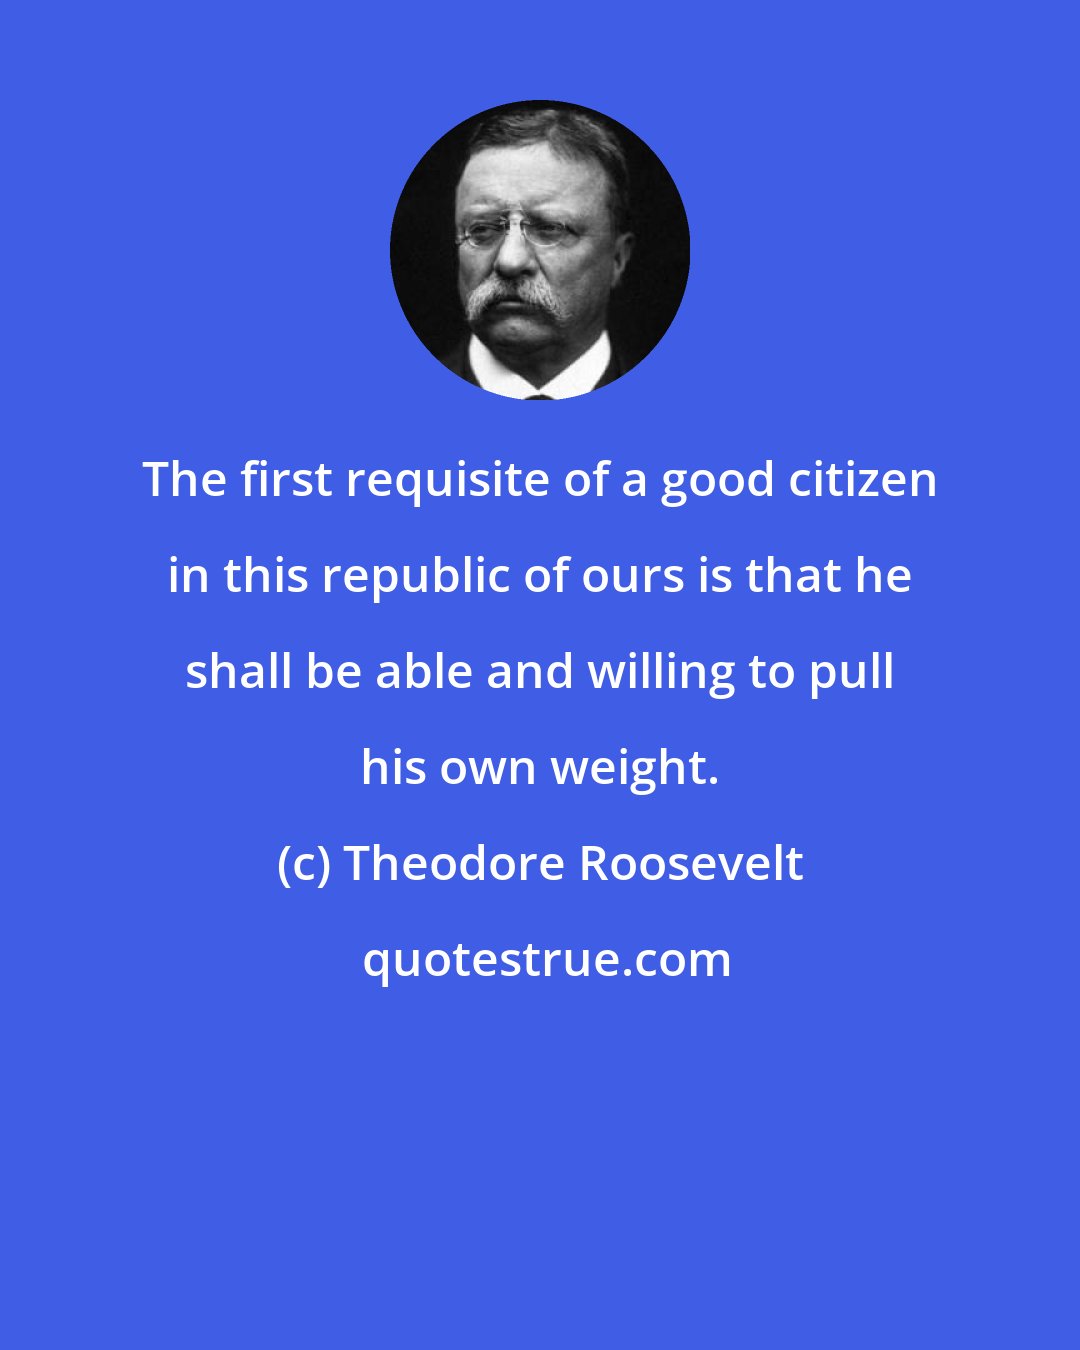 Theodore Roosevelt: The first requisite of a good citizen in this republic of ours is that he shall be able and willing to pull his own weight.